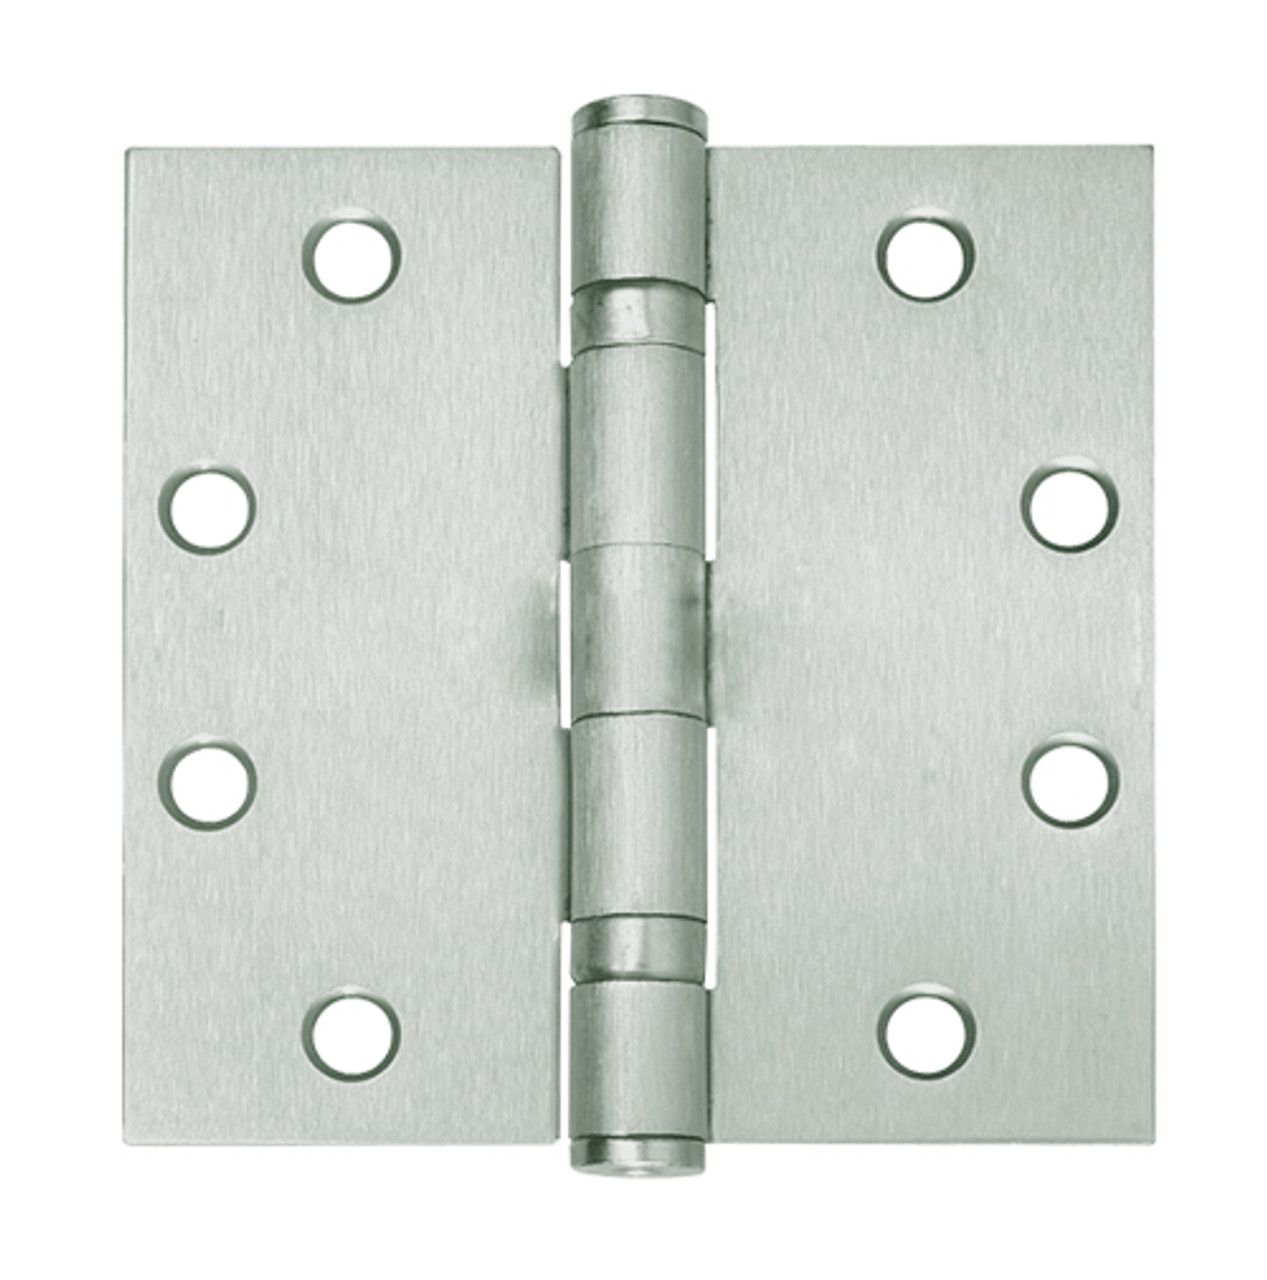 5BB1-4-5x4-619-NRP IVES 5 Knuckle Ball Bearing Full Mortise Hinge in Satin Nickel